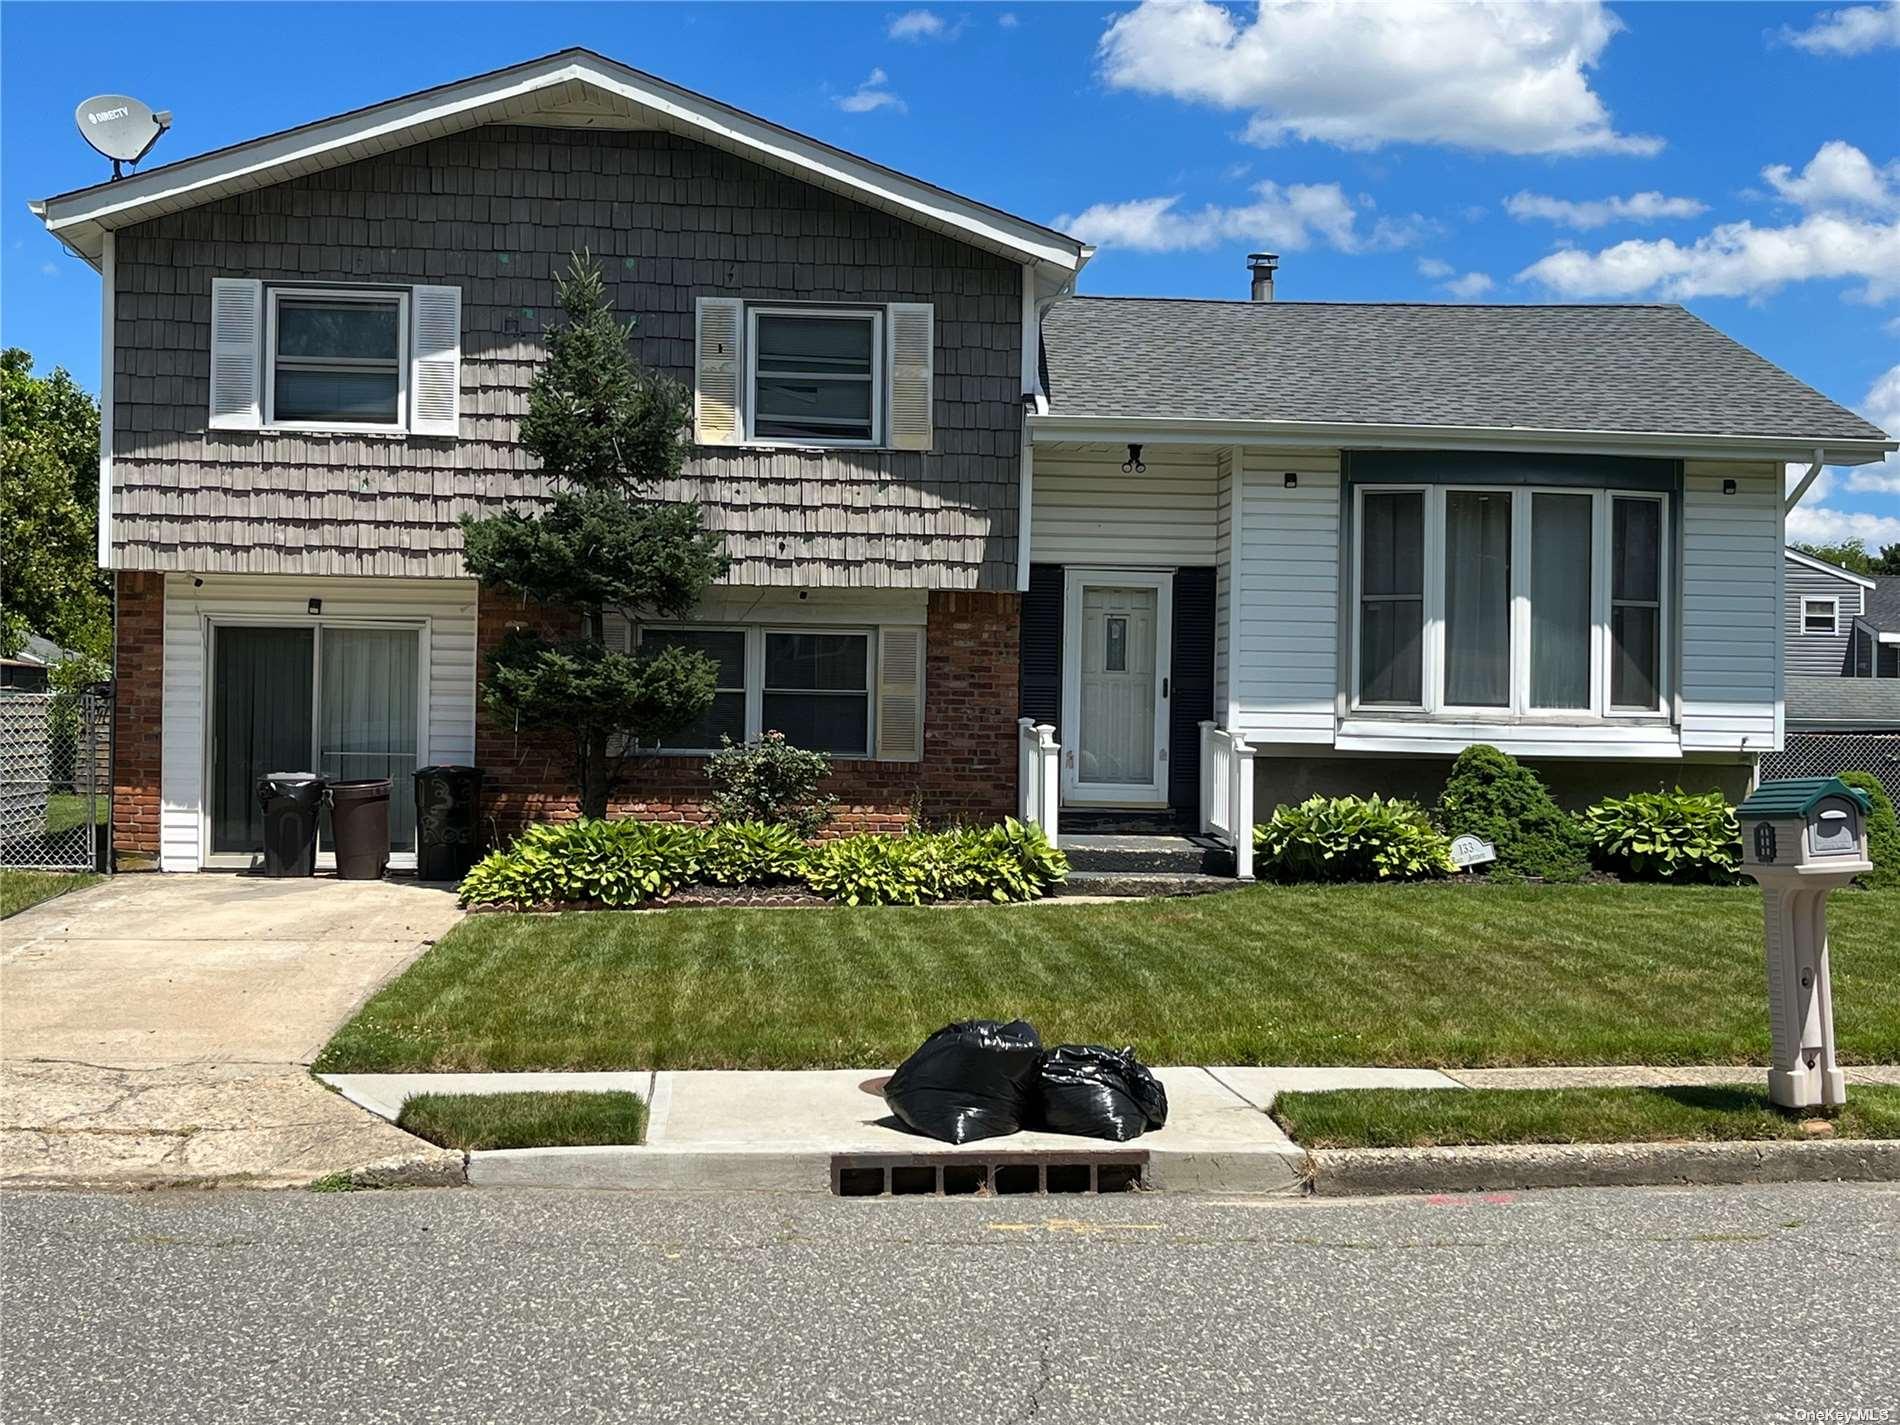 133 Root Avenue in Long Island, Central Islip, NY 11722